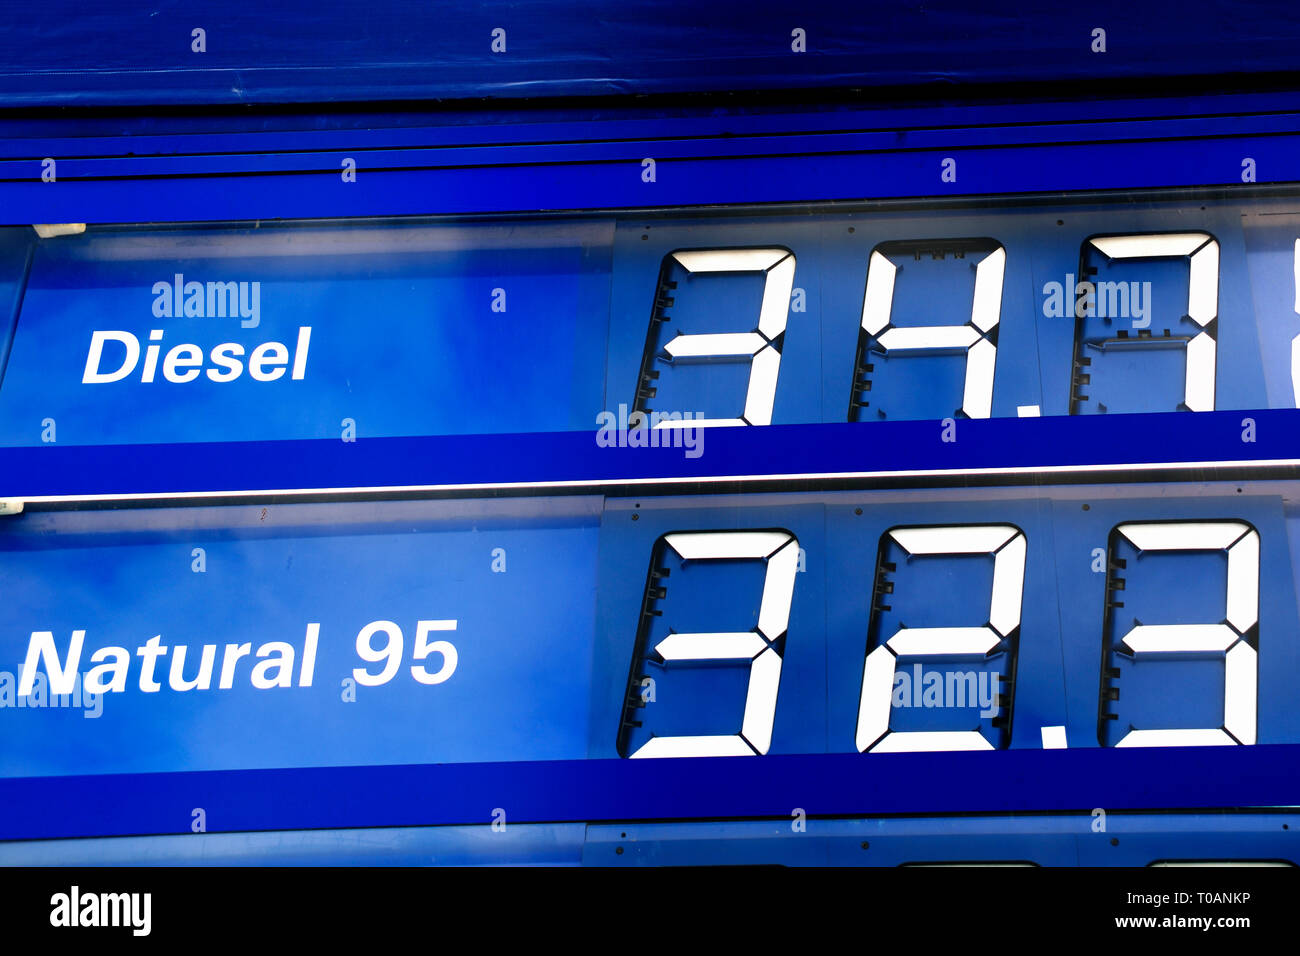 display with prices of Natural and Diesel fuel at a filling station in Czech republic Stock Photo